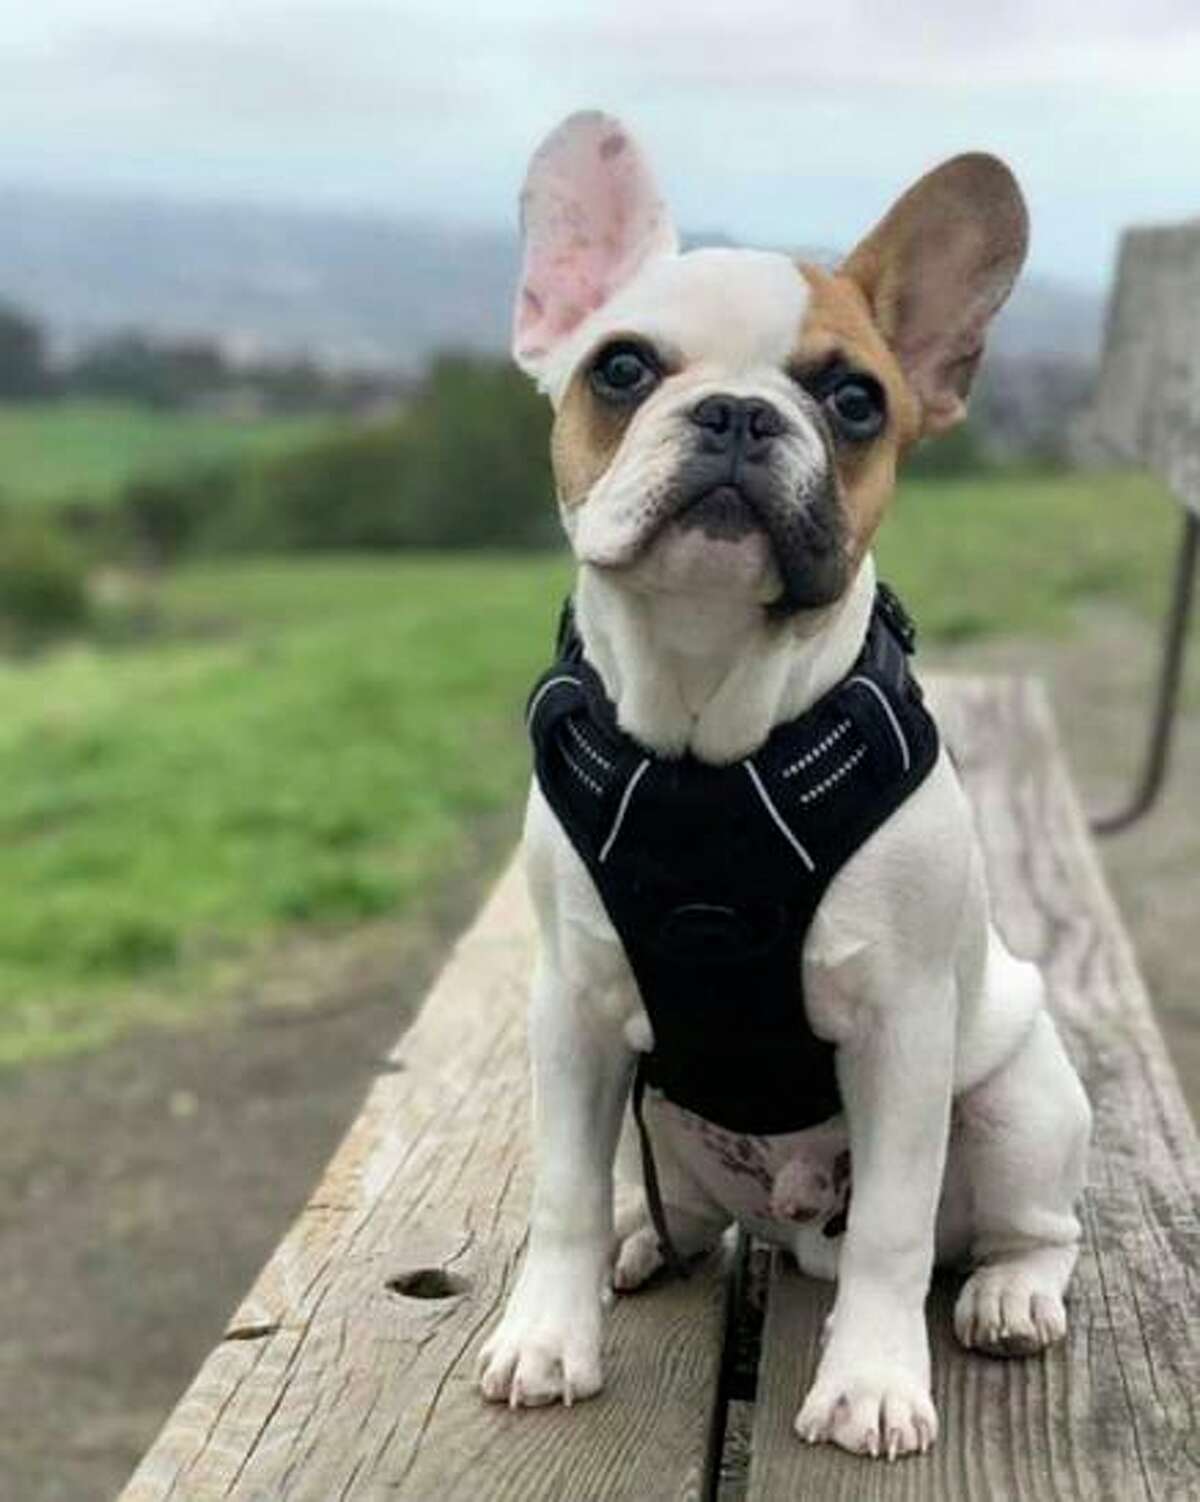 Tito, a French bulldog, was taken from his owner at gunpoint in Castro Valley.